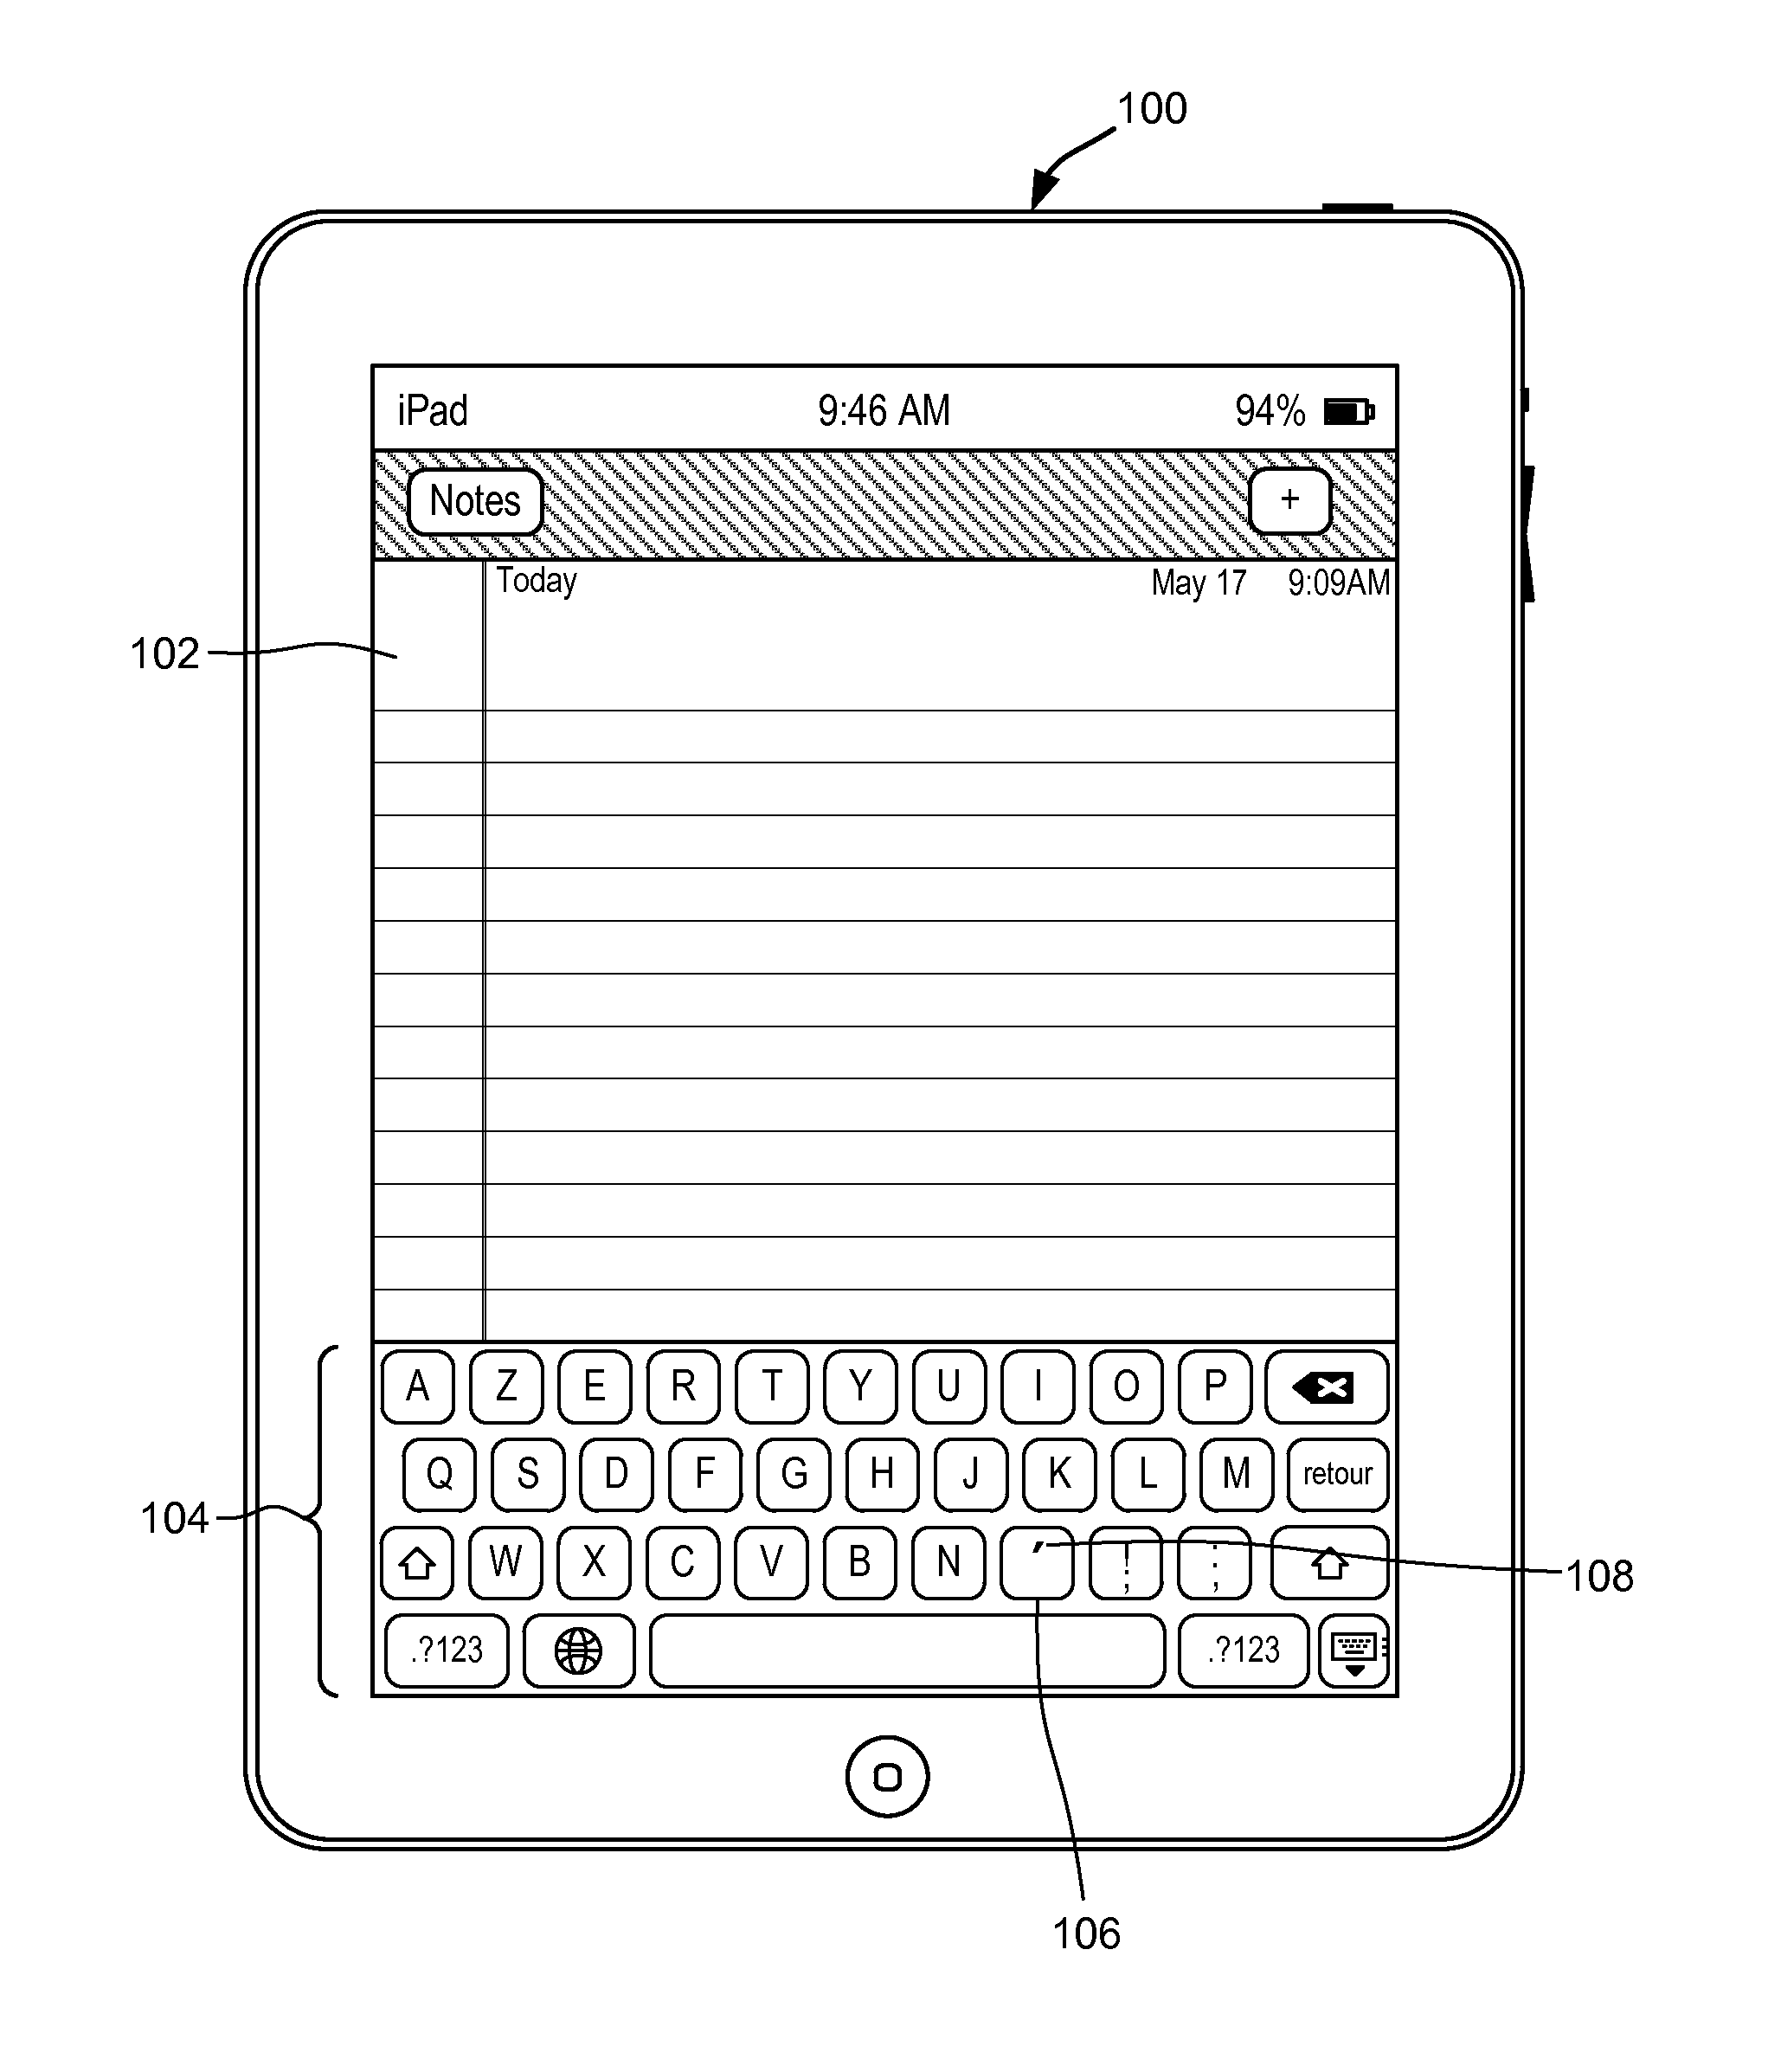 Dynamically changing a character associated with a key of a keyboard